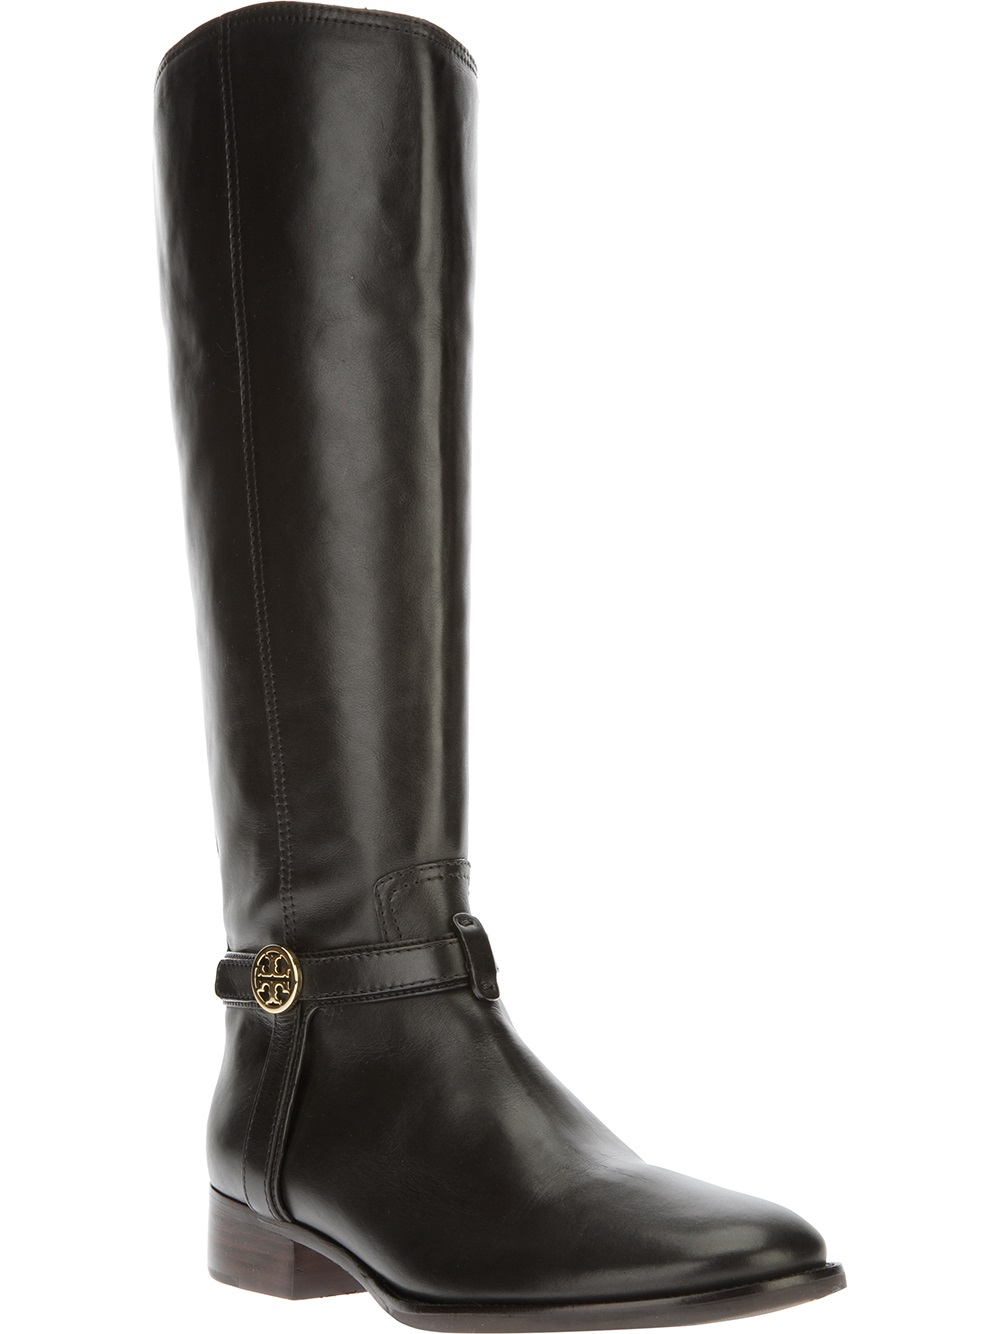 Lyst - Tory Burch Riding Boot in Black